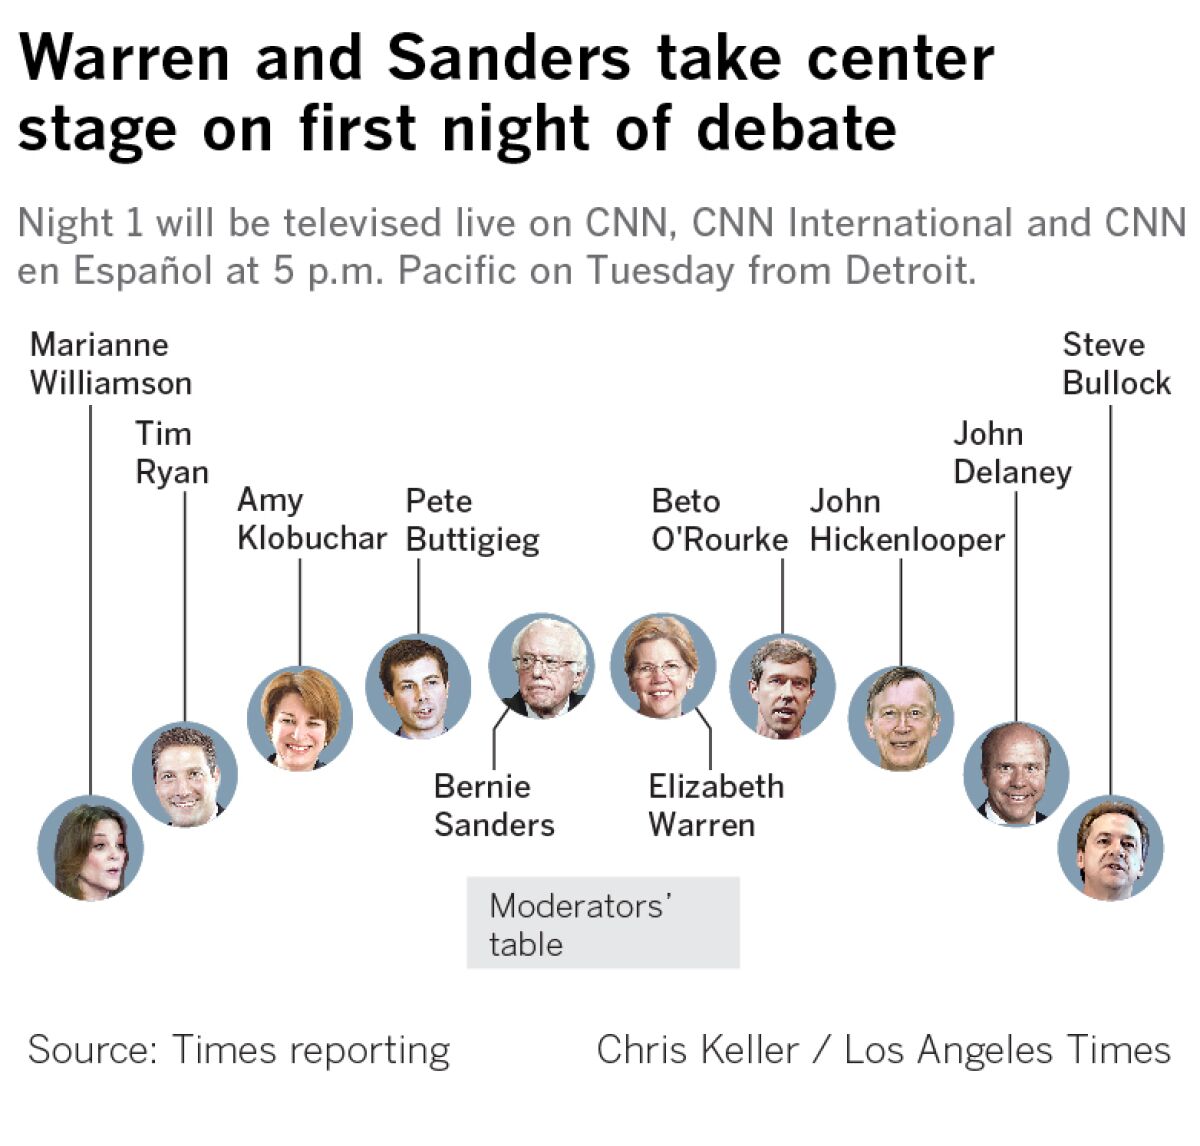 Night 1 of the second round of Democratic presidential debates.